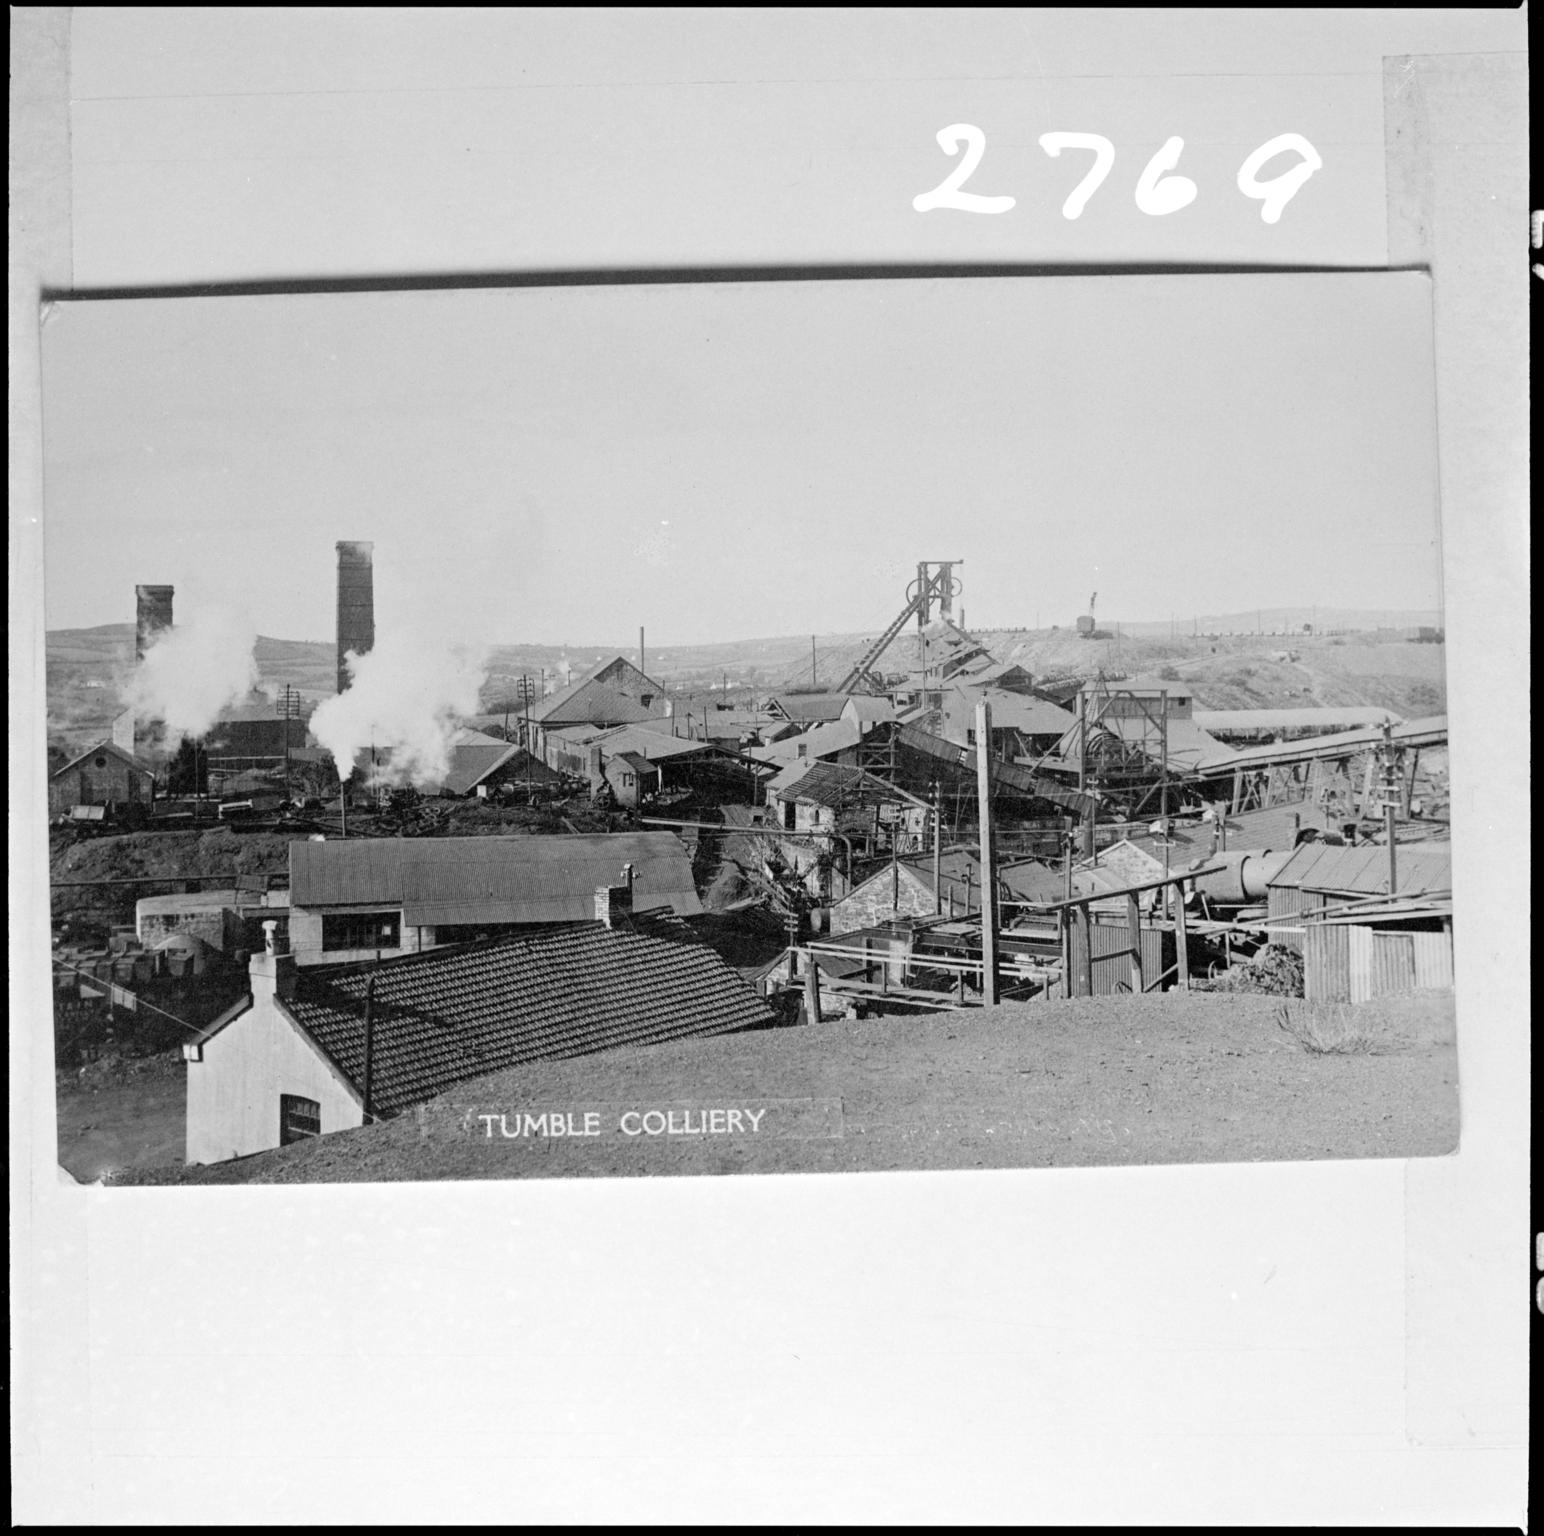 Great Mountain Colliery, film negative